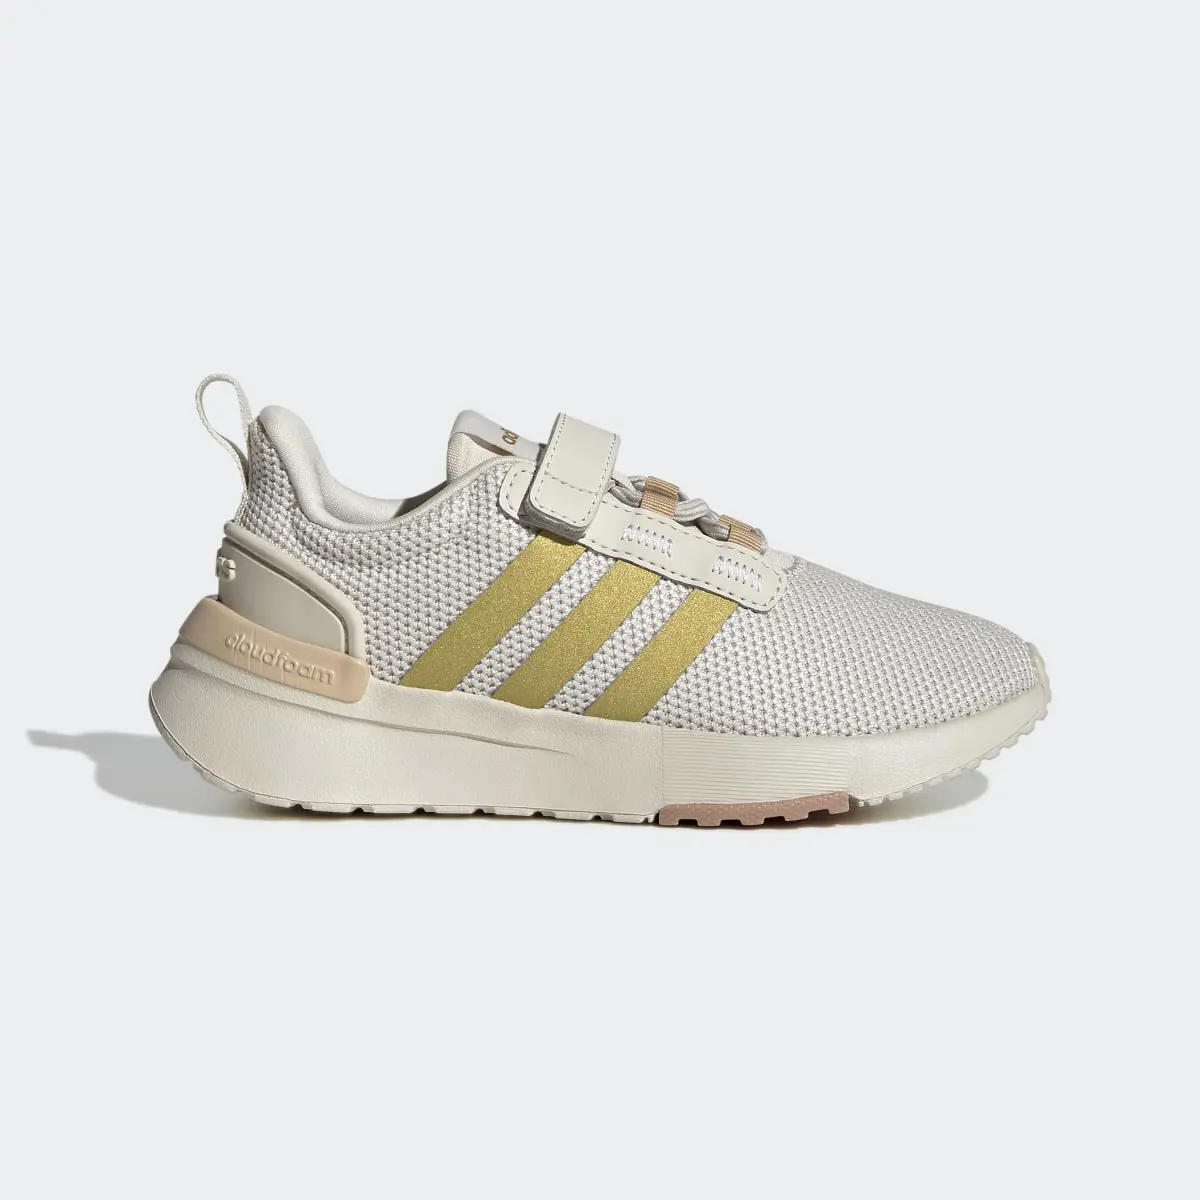 Adidas Chaussure Racer TR21. 2